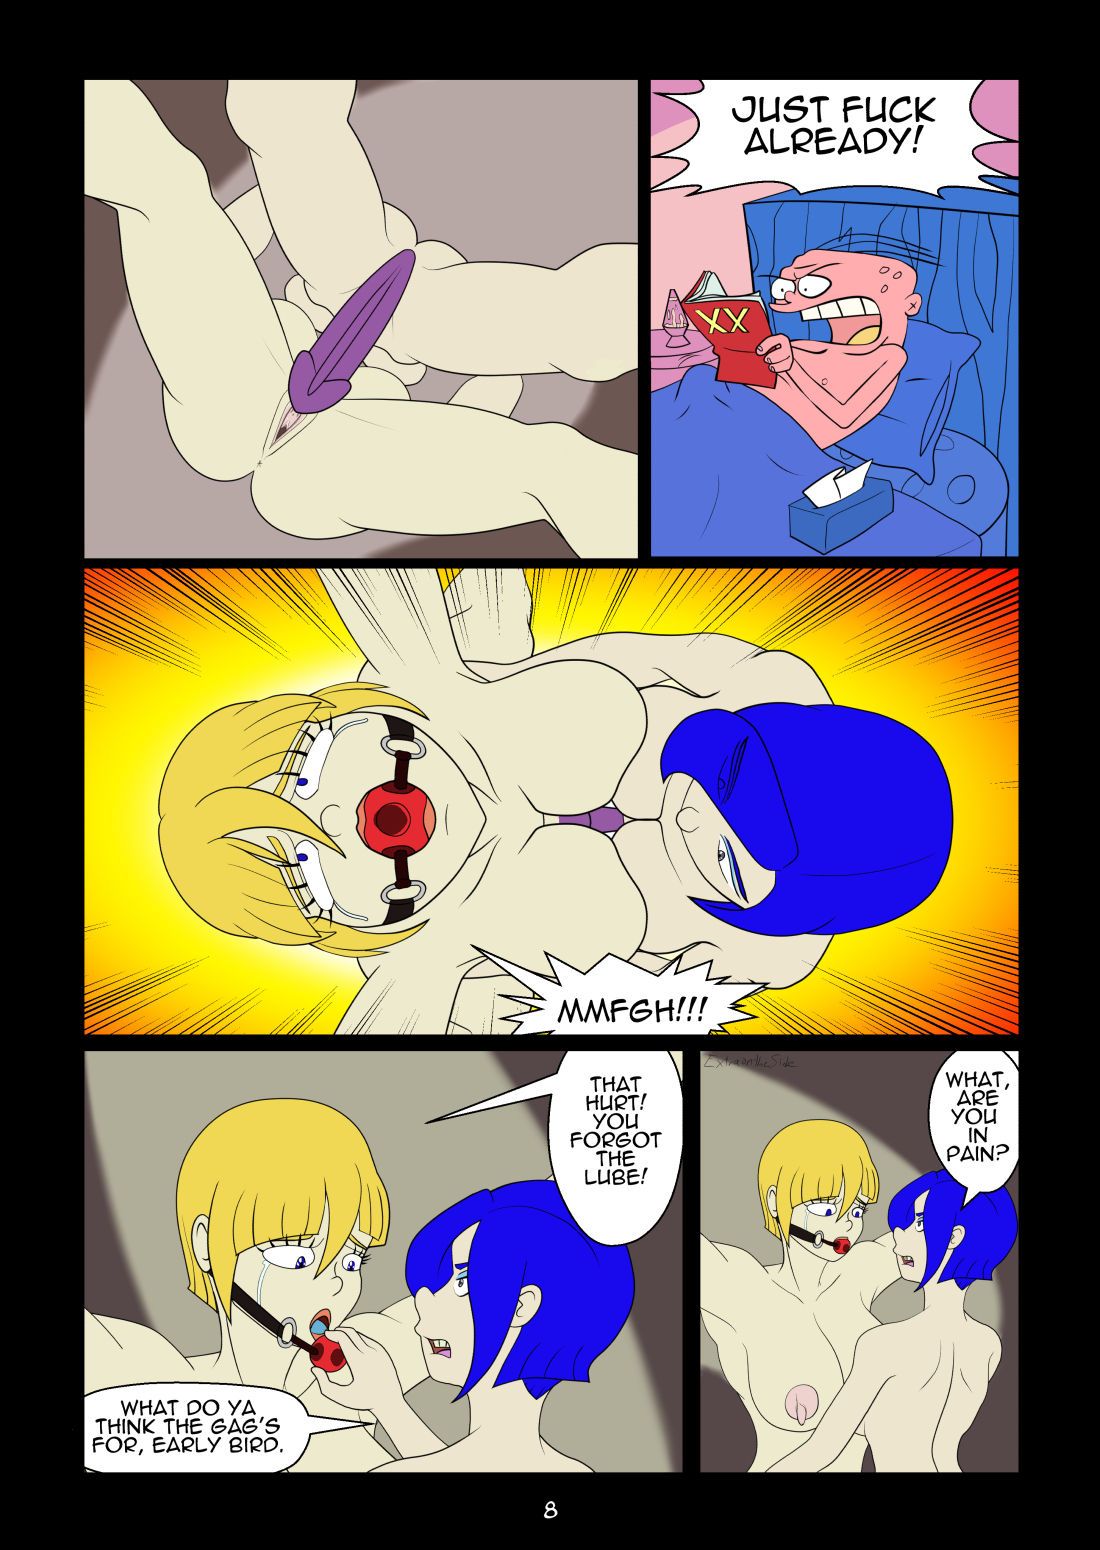 [Extraontheside] Marie x Nazz (Ed, Edd n' Eddy) [Ongoing] 8